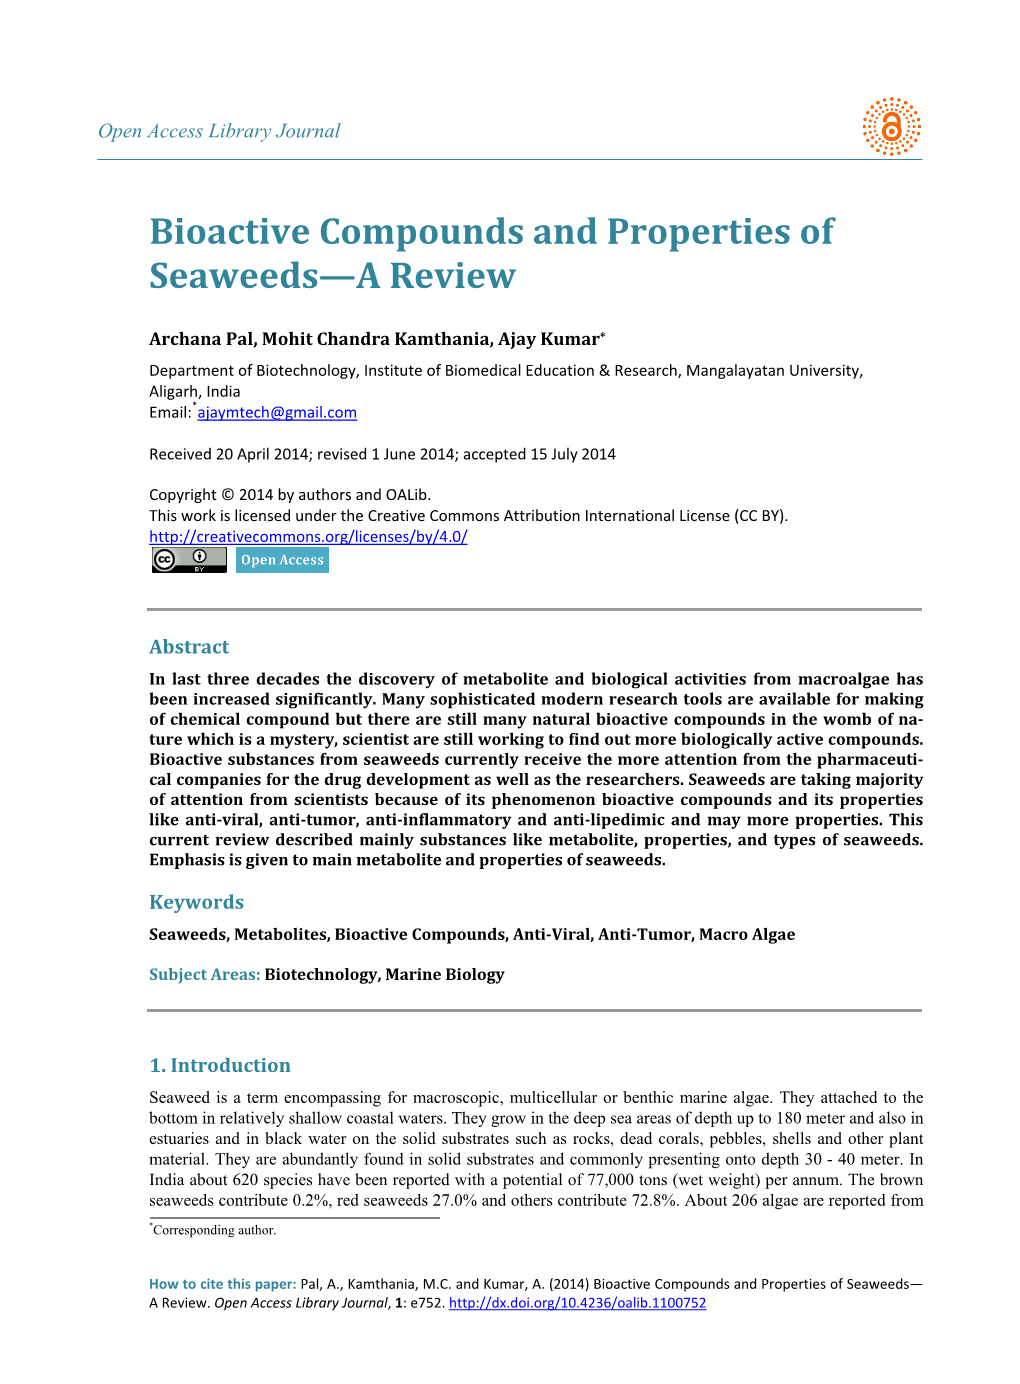 Bioactive Compounds and Properties of Seaweeds—A Review